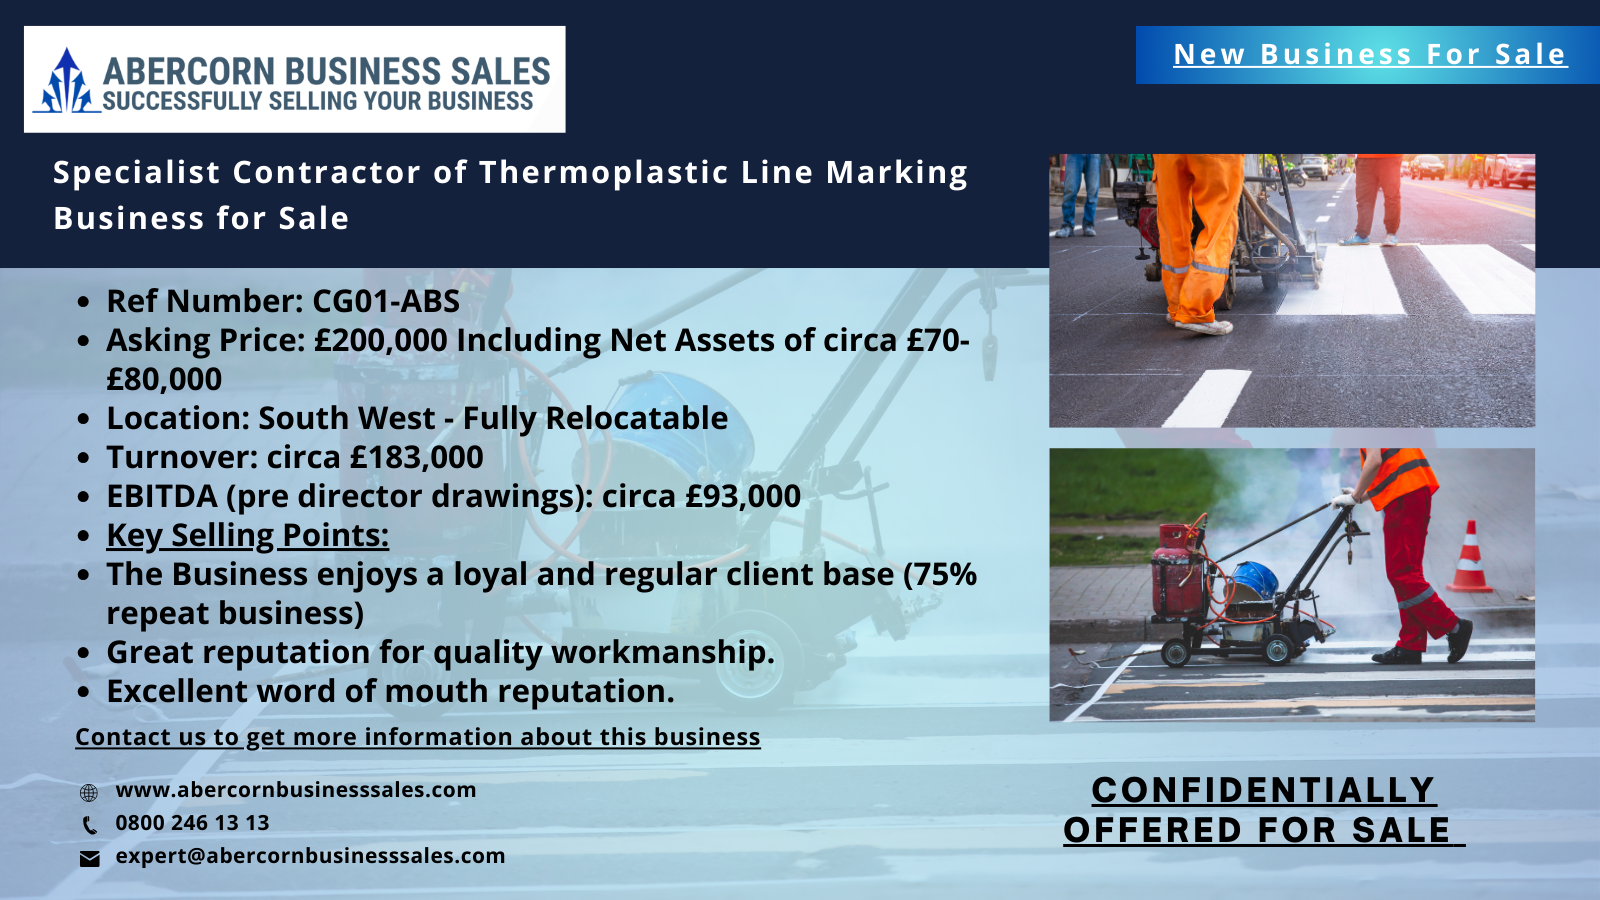 CG01-ABS - Specialist Contractor of Thermoplastic Line Marking Business for Sale